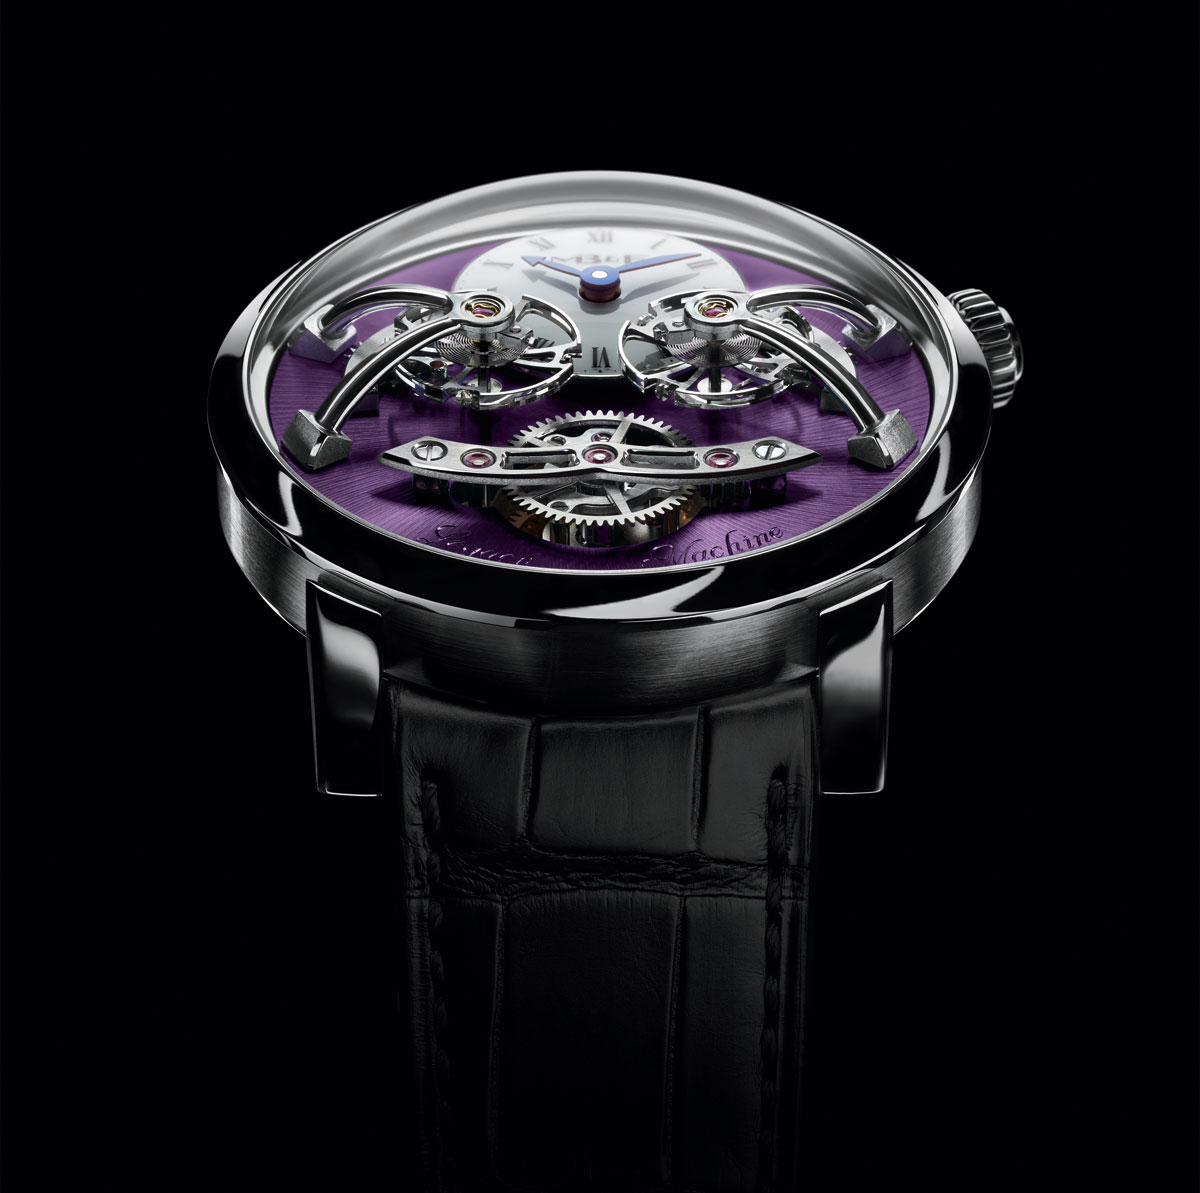 LM2 White Gold Purple - 12-piece Limited Edition Watch by MB&F